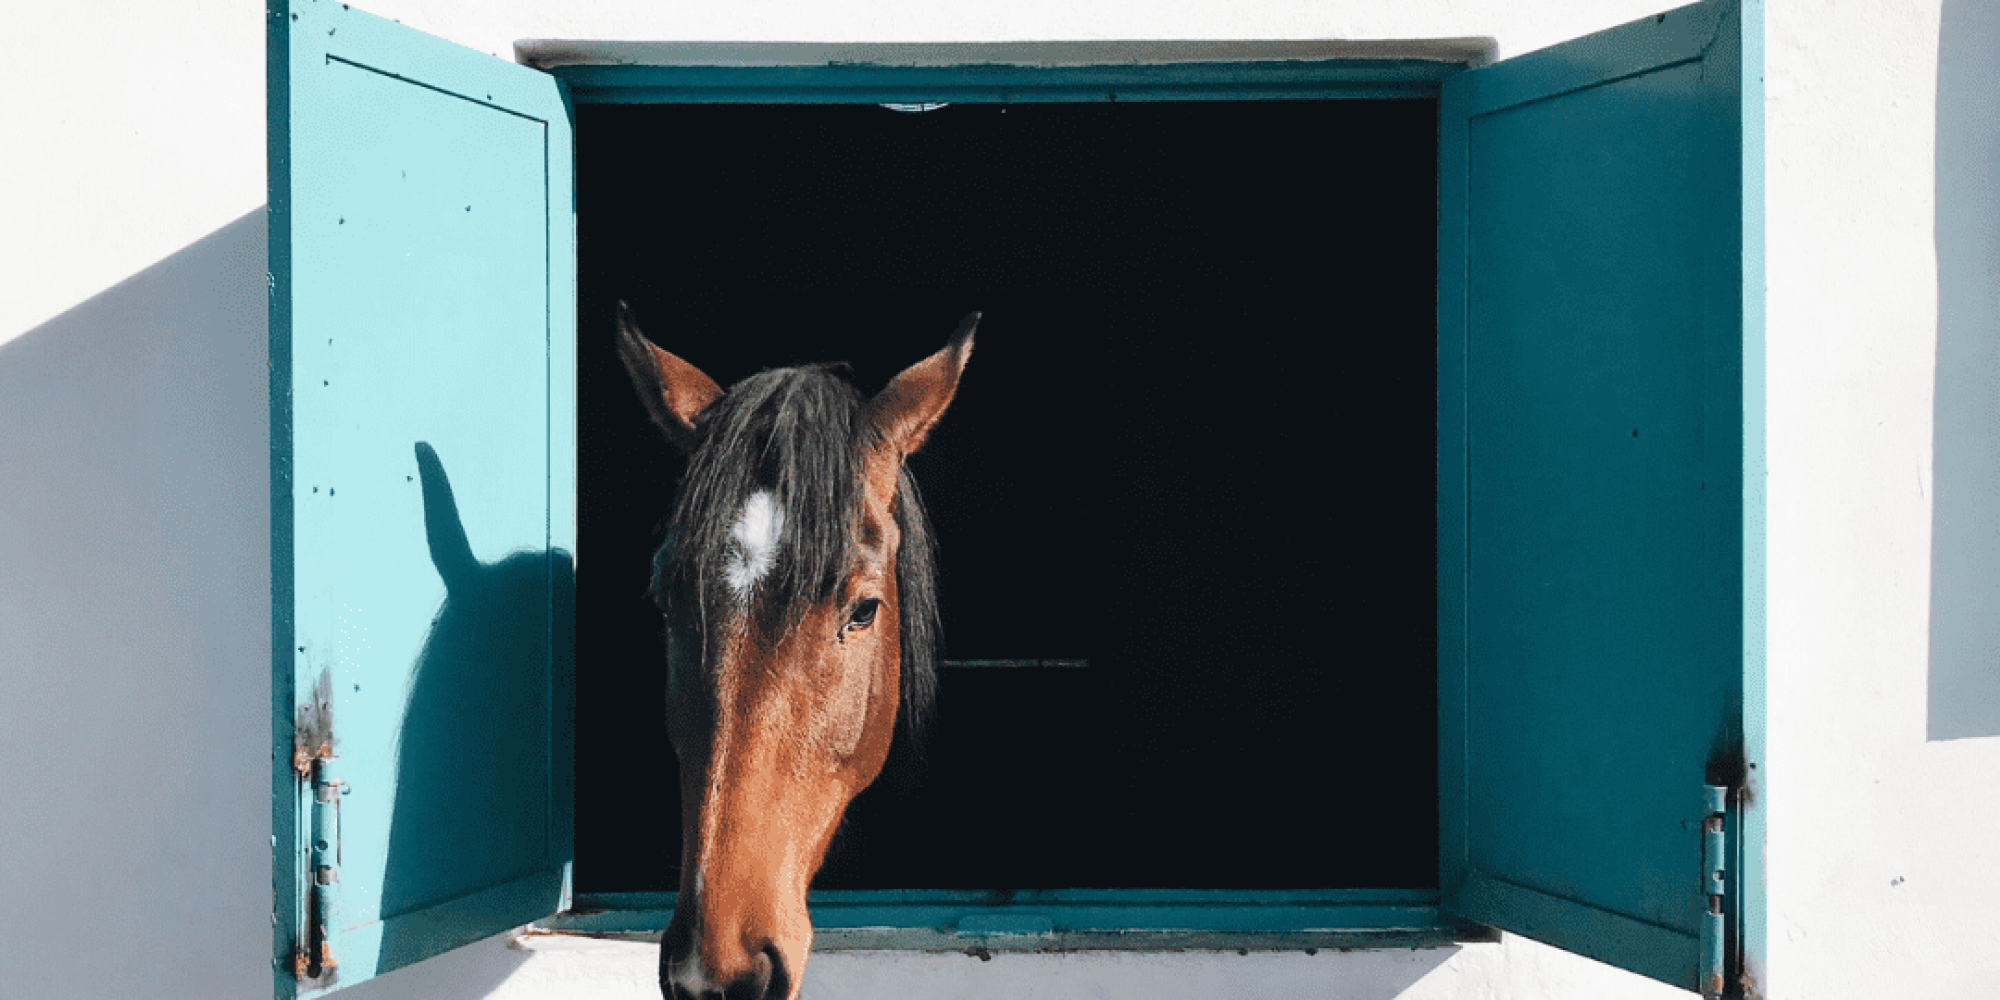 Brown horse looks out of the barn window